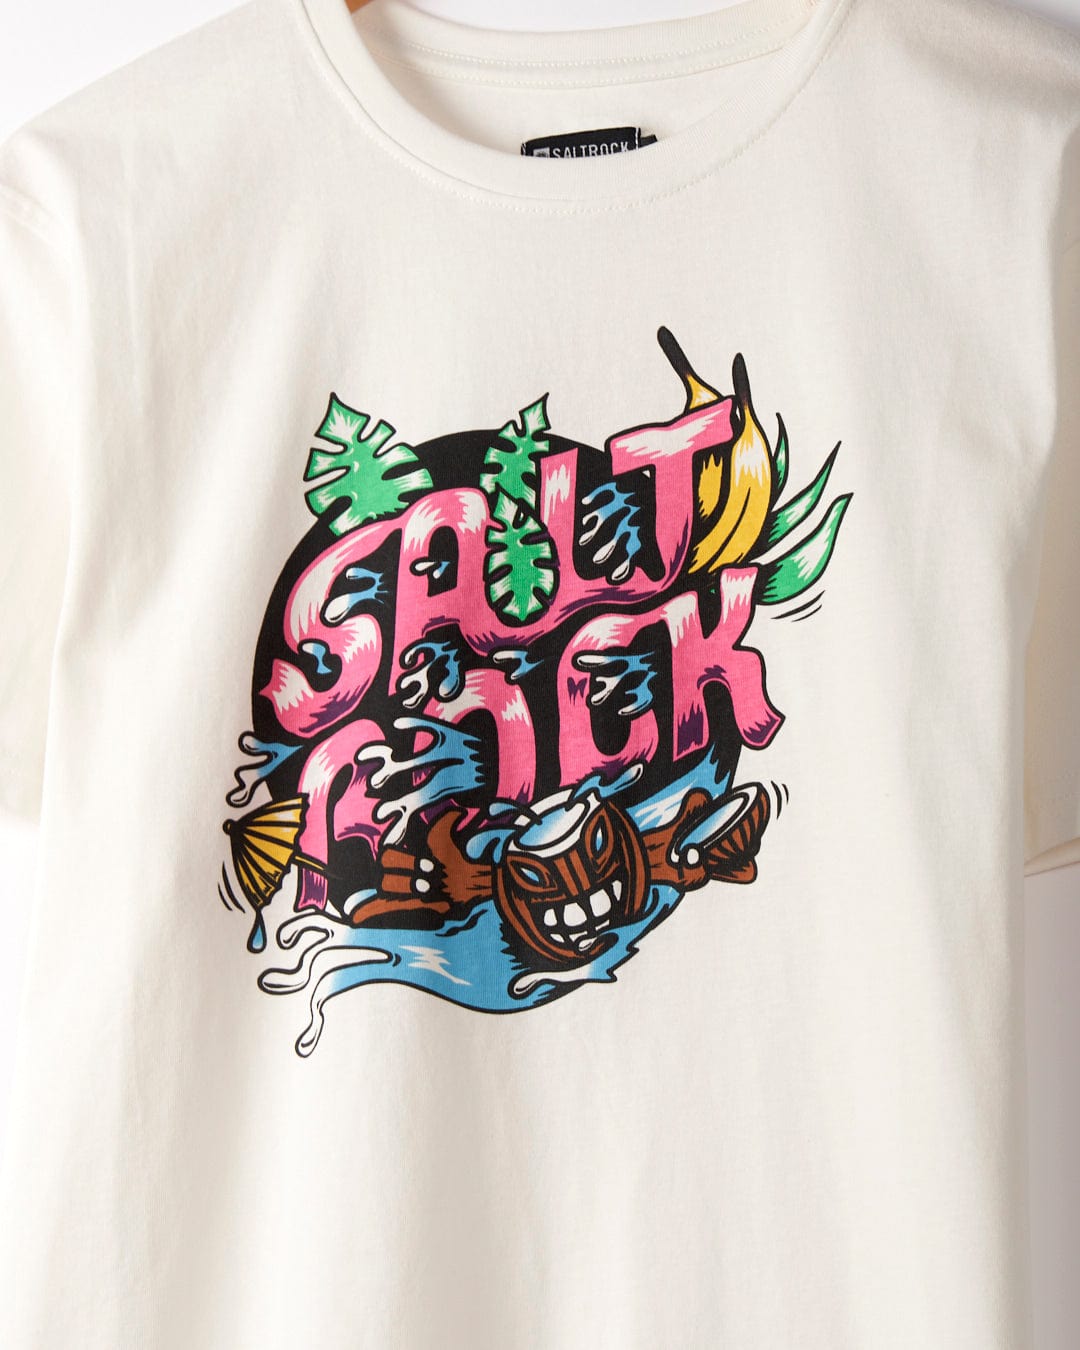 A 100% cotton white t-shirt featuring a colorful graphic text design that reads "SALT ROCK," surrounded by tropical elements including leaves, a tiki mask, waves, and surfboards. Perfect for capturing the laid-back vibe of Saltrock. Presenting the Tahiti - Mens Short Sleeve T-Shirt - White from Saltrock.